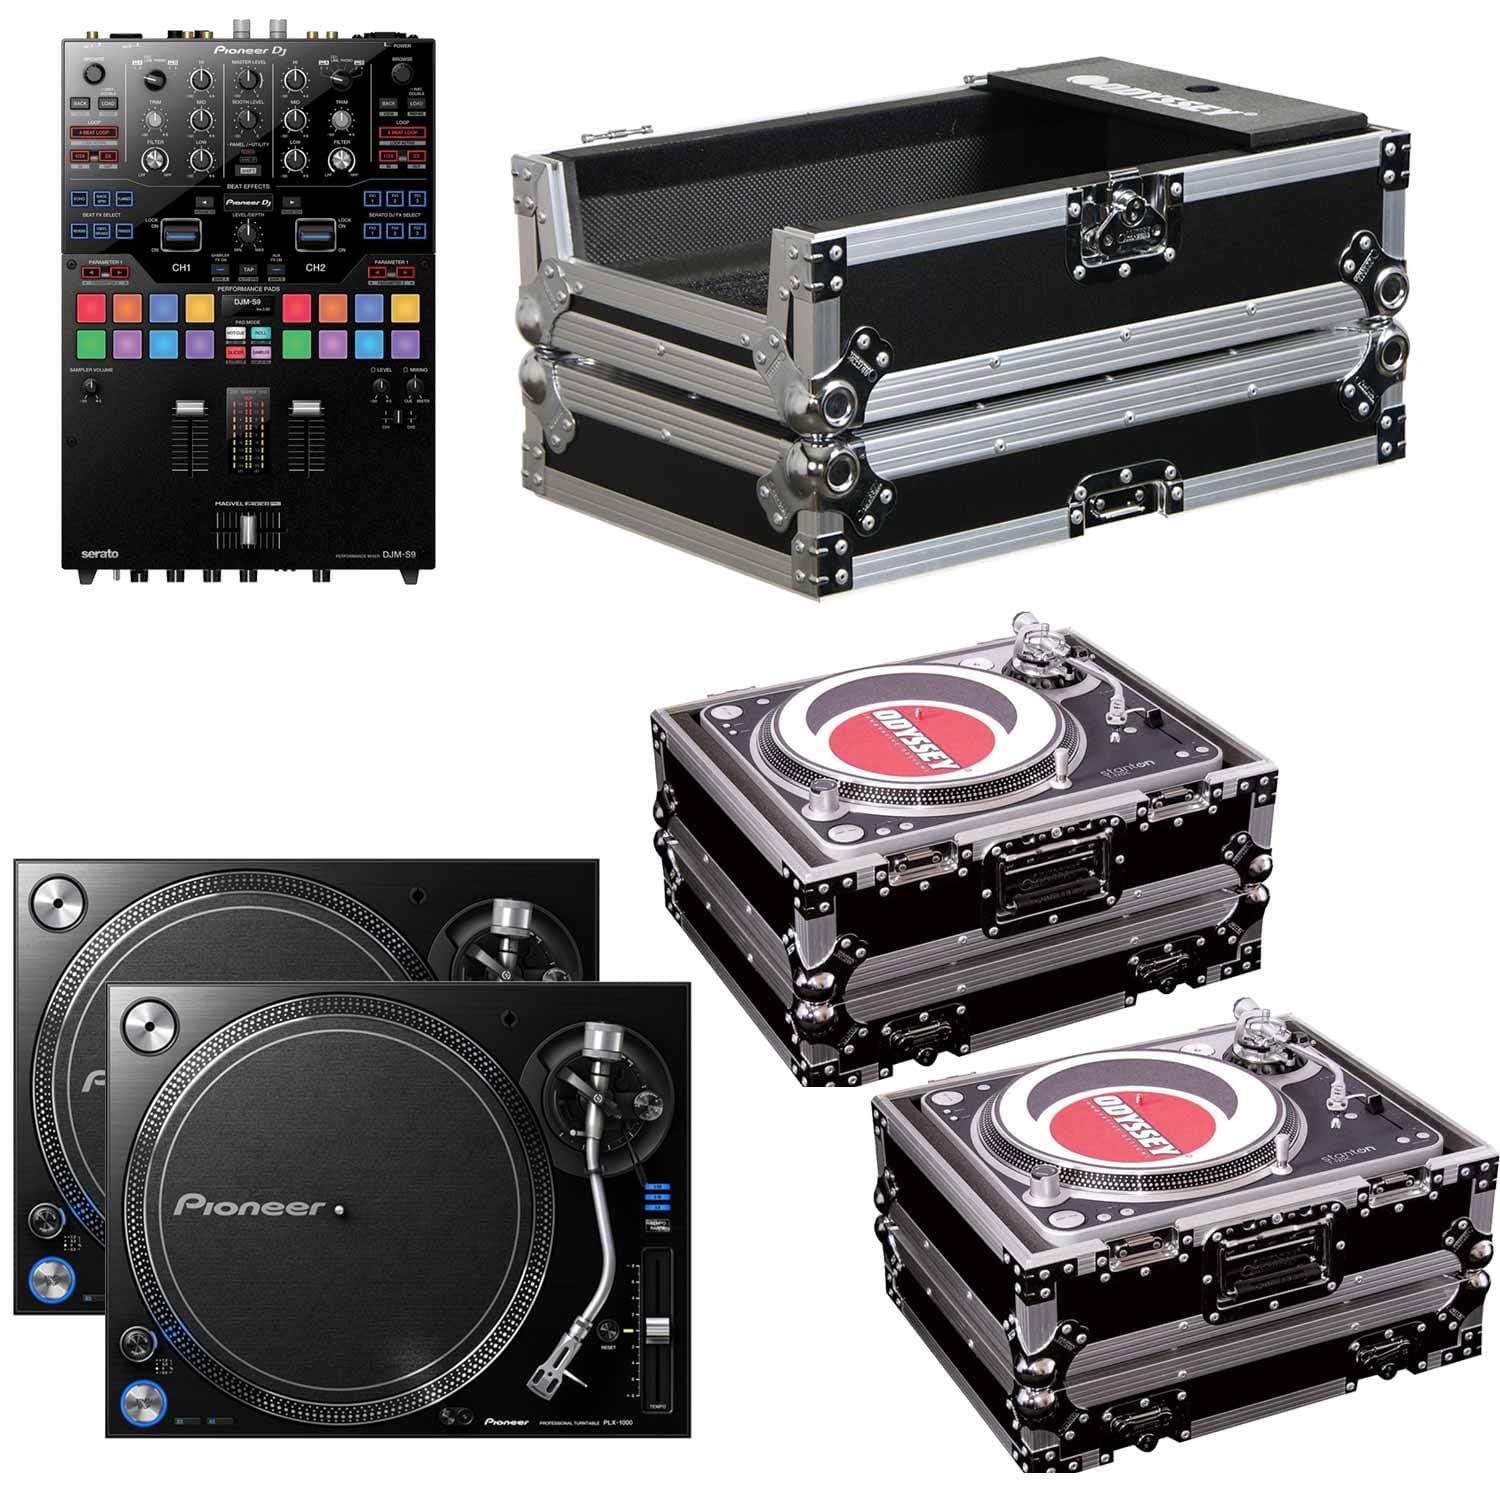 Pioneer DJ DJM-S9 Mixer with (2) PLX1000 Turntables and Cases